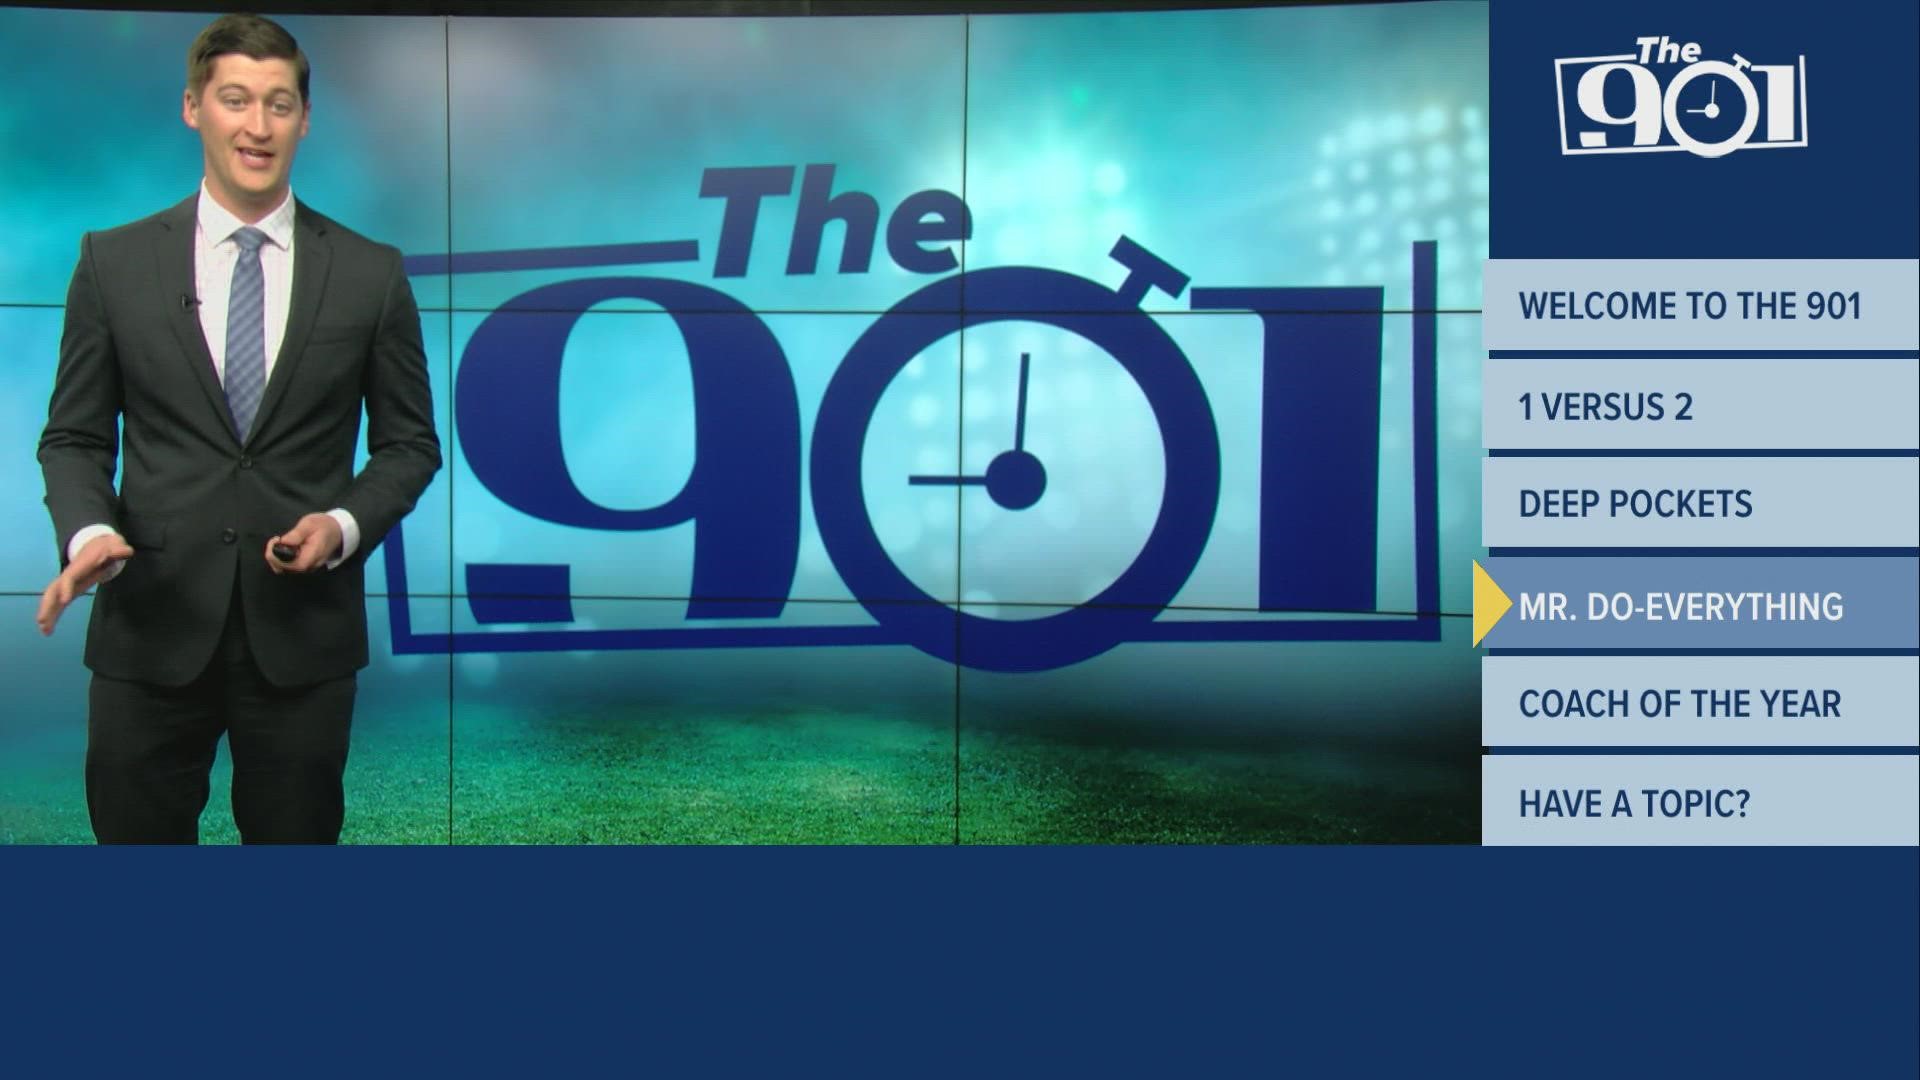 Clayton Collier gets you up to speed on everything Memphis sports in Thursday's episode of The 901.